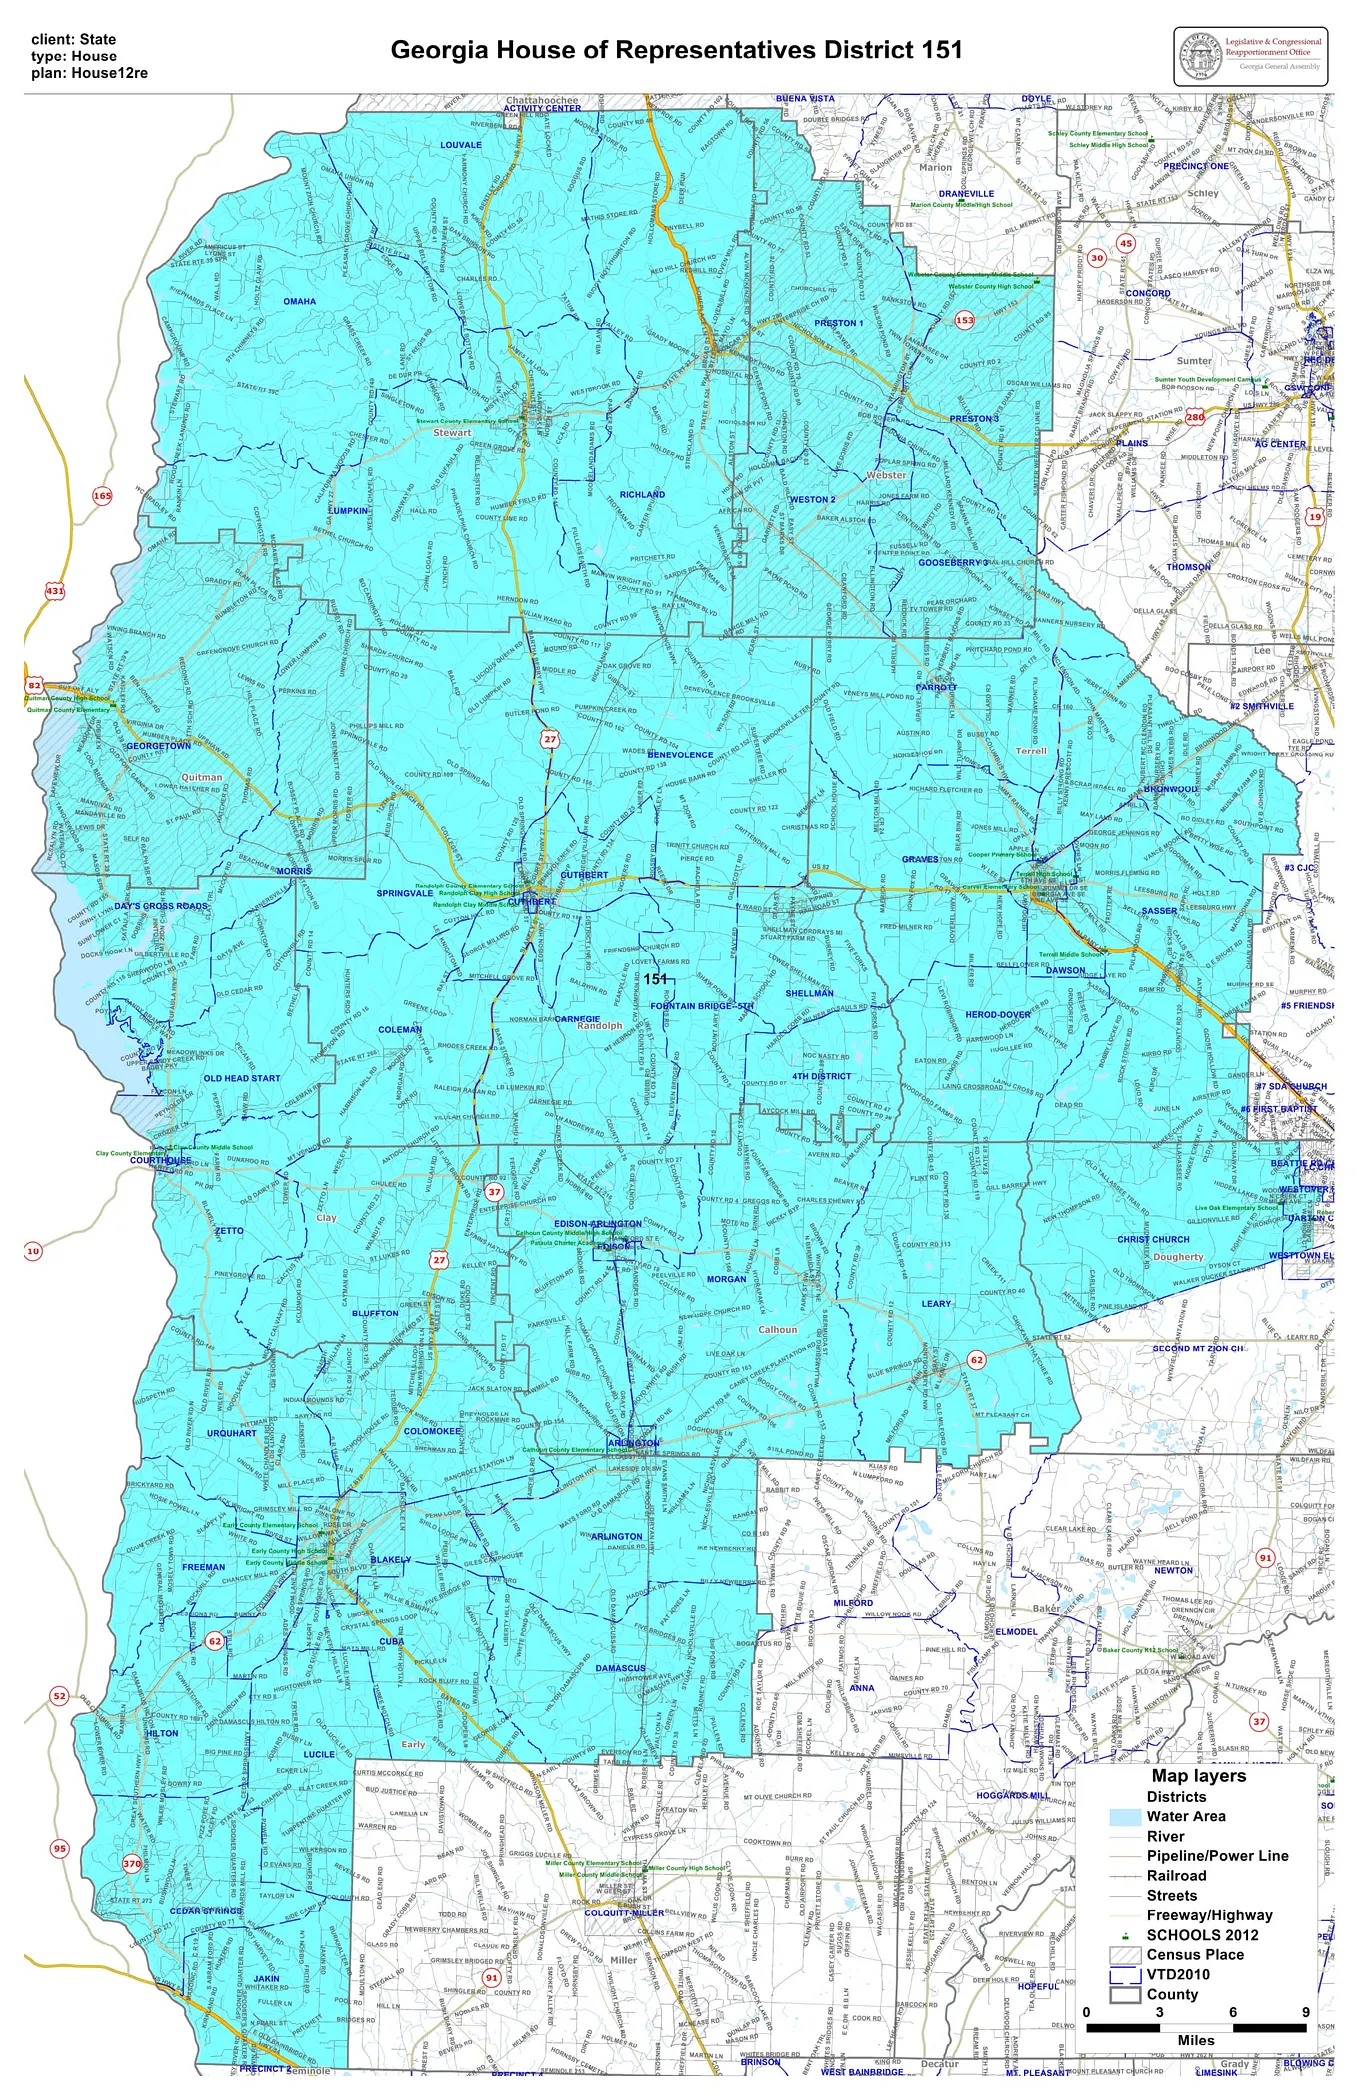 Georgia’s Competitive Districts: HD-151